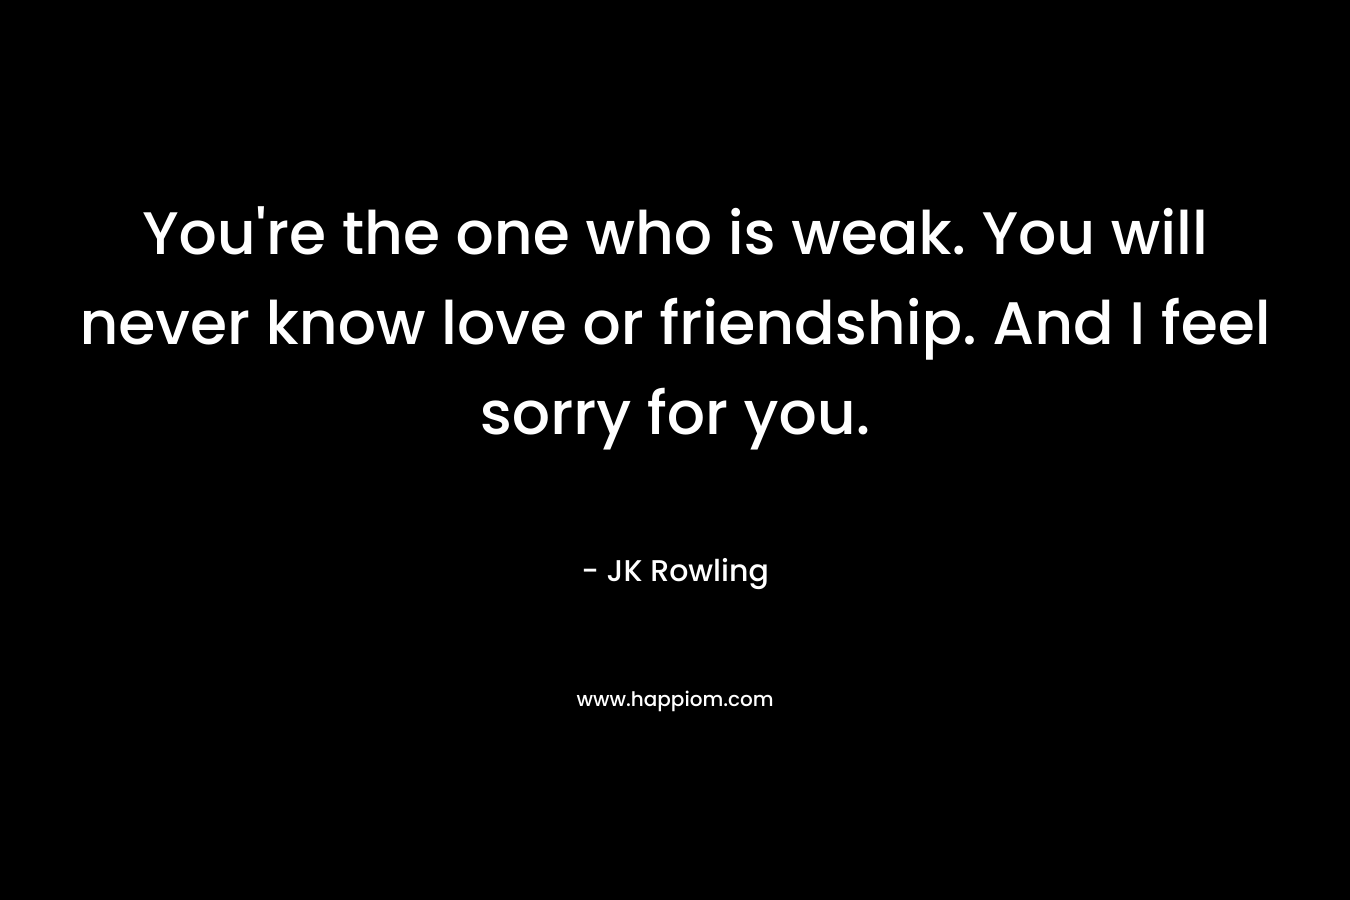 You're the one who is weak. You will never know love or friendship. And I feel sorry for you.